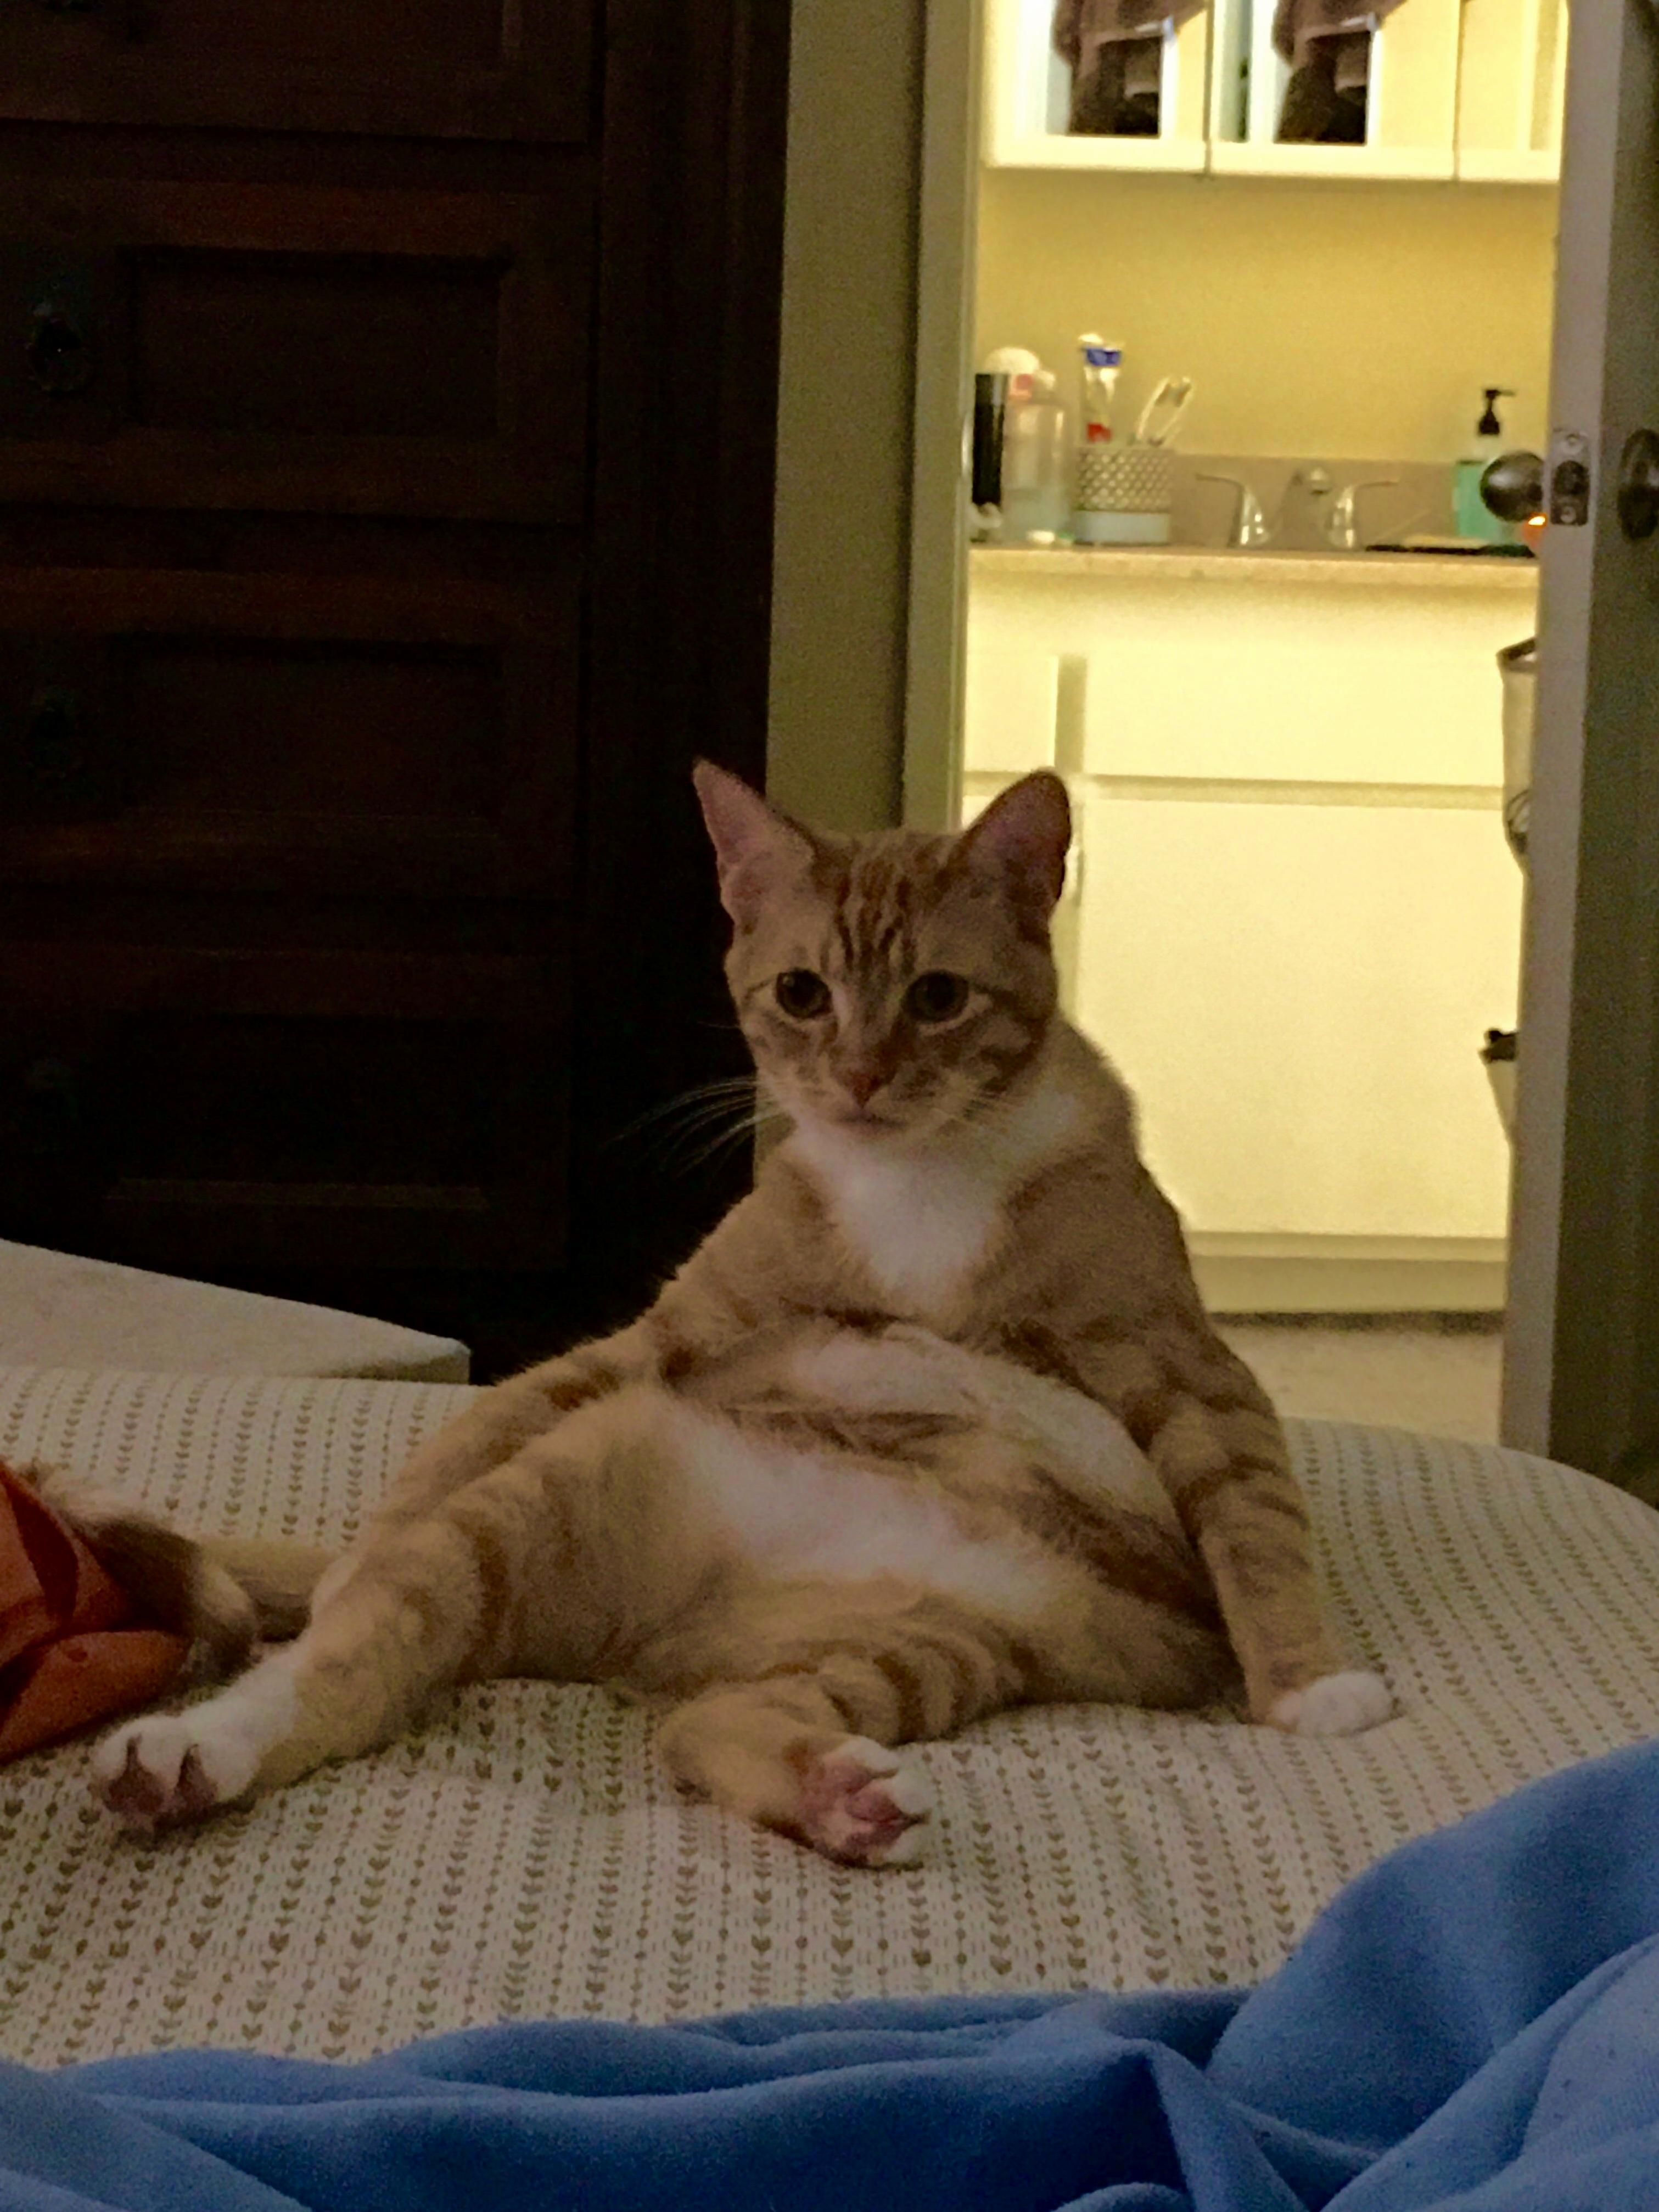 Anyone elses cat like to sit in weird positions